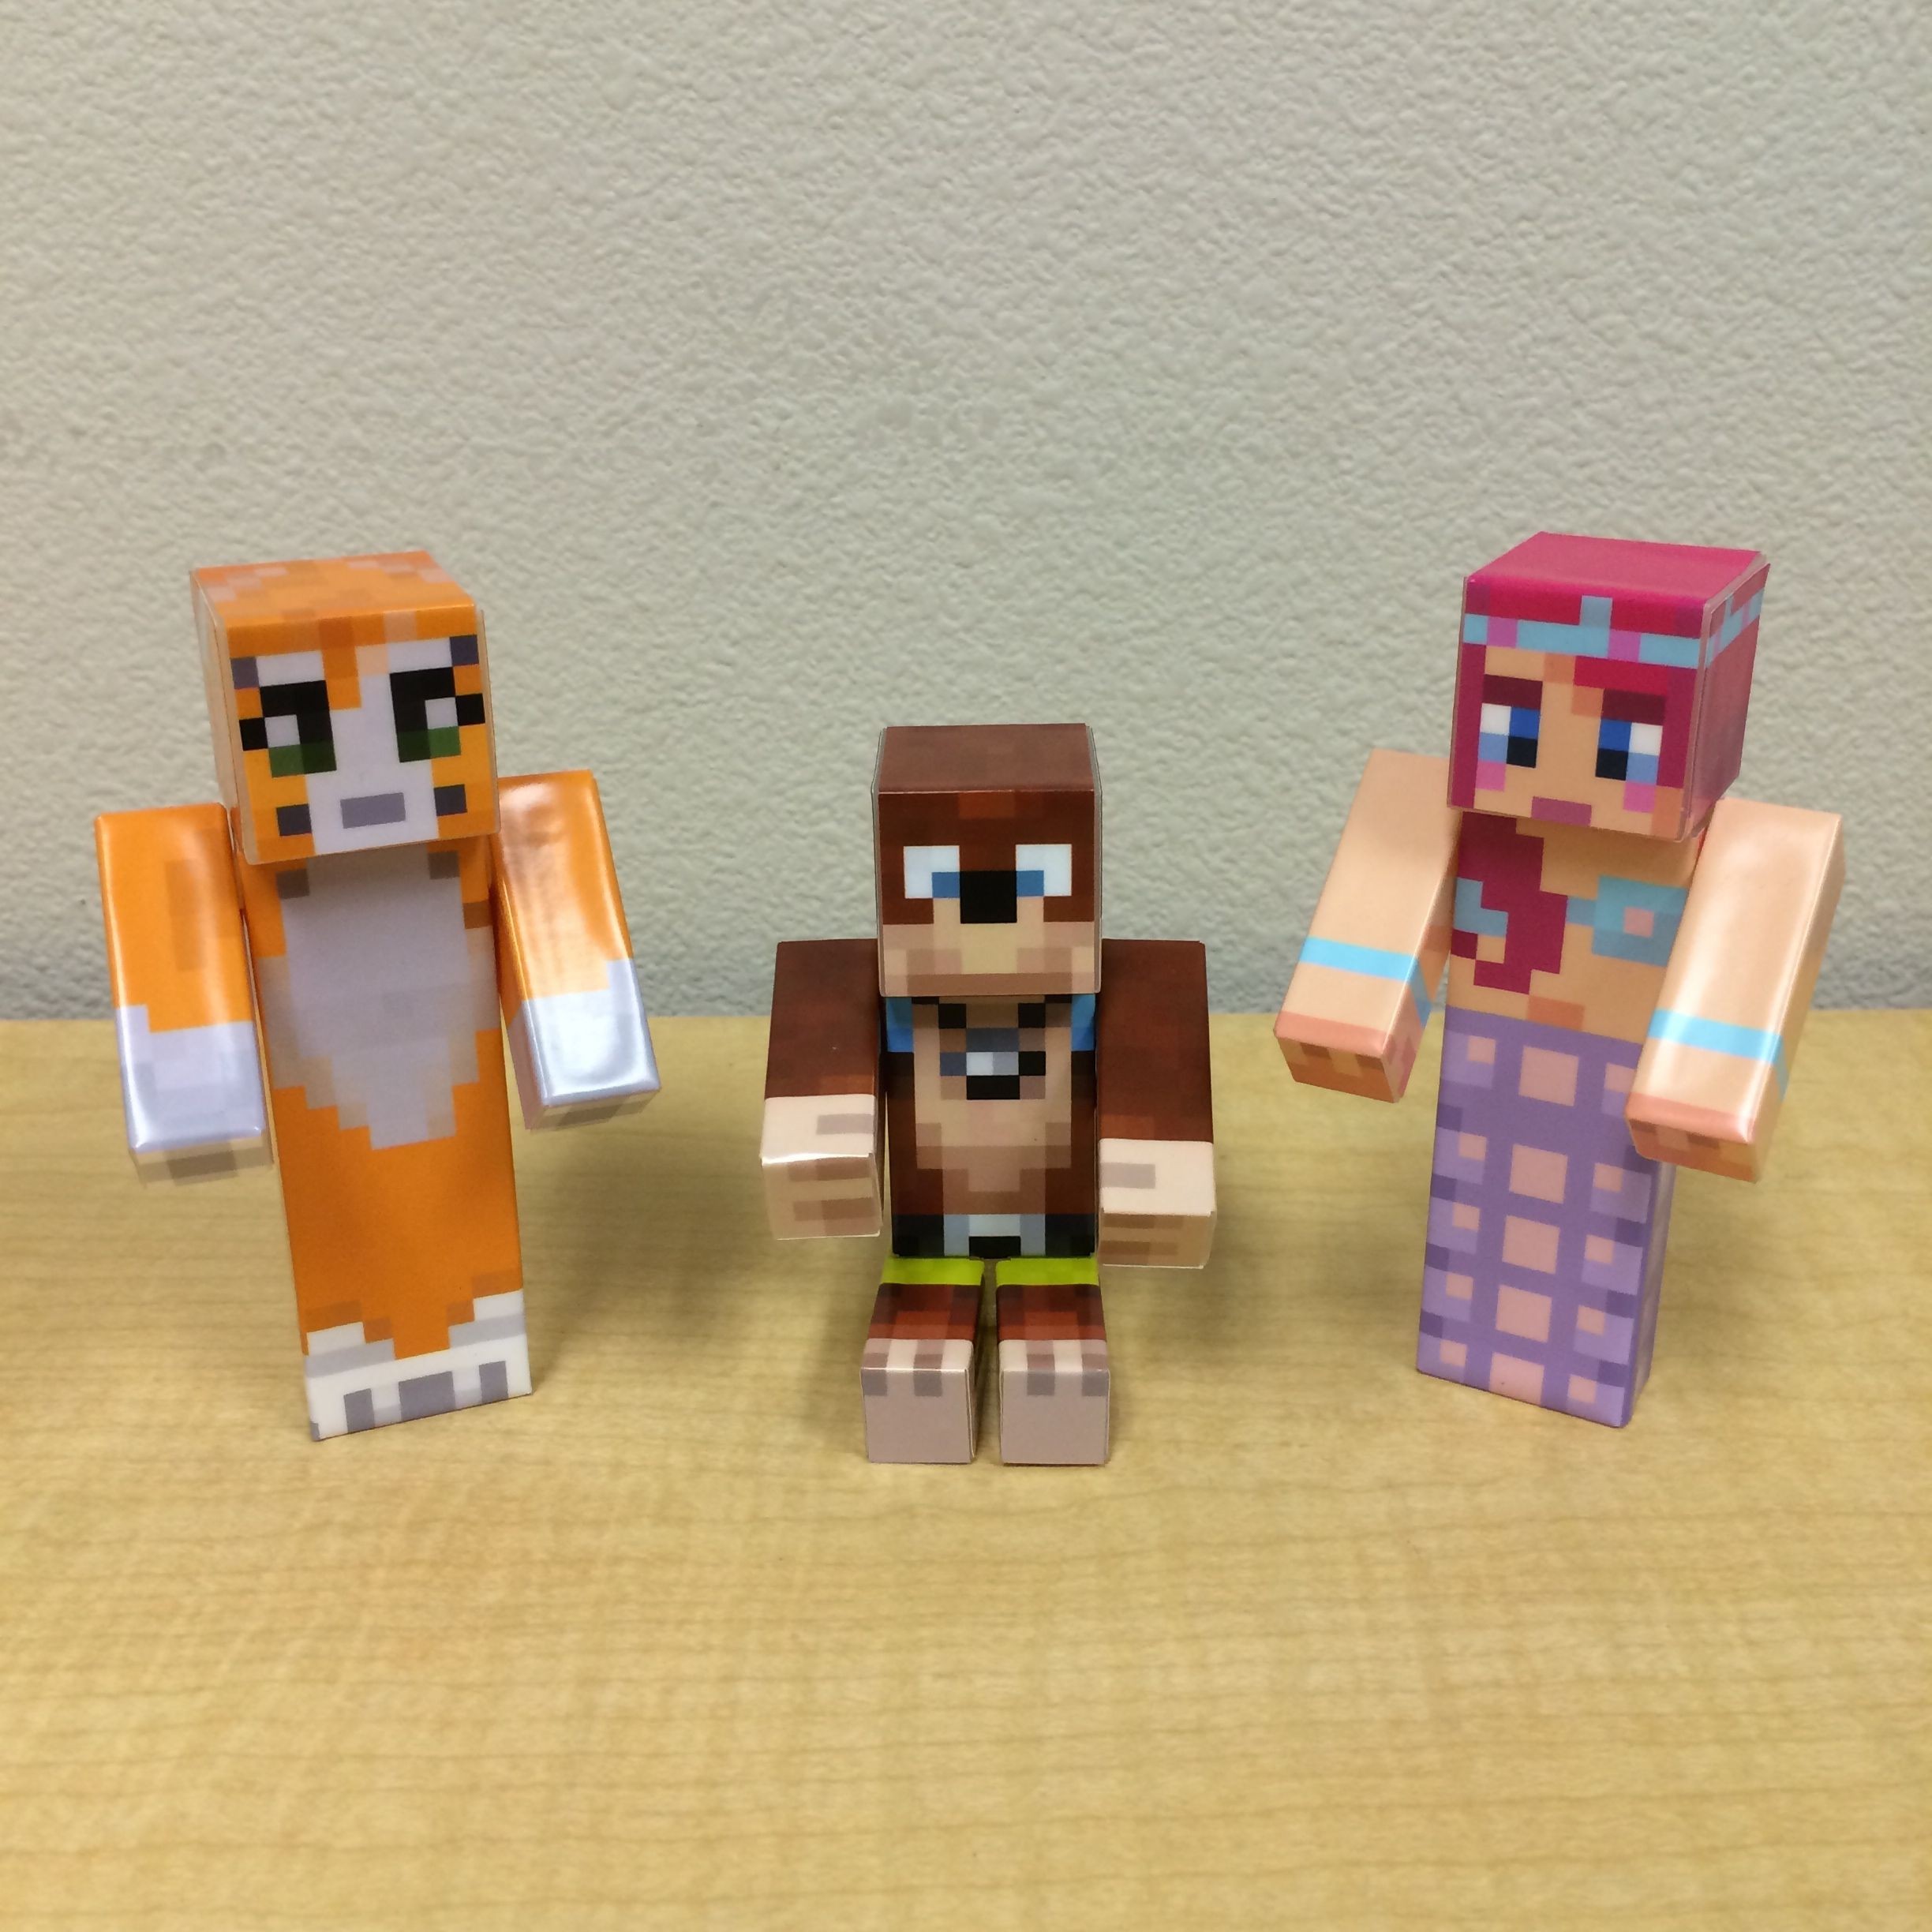 Minecraft Papercraft Minecart Set Check Out Our Custom toys for Minecraft Get One Made with Your